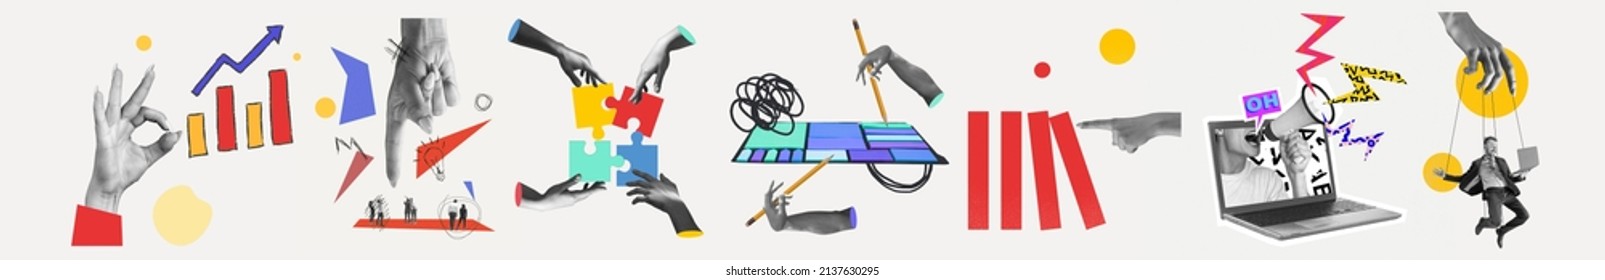 Graphs, puzzles, diagrams. Contemporary art collage made of shots of people, hands working hardly isolated over white background, Concept of business, finance, career, co-workers, teambuilding. Flyer